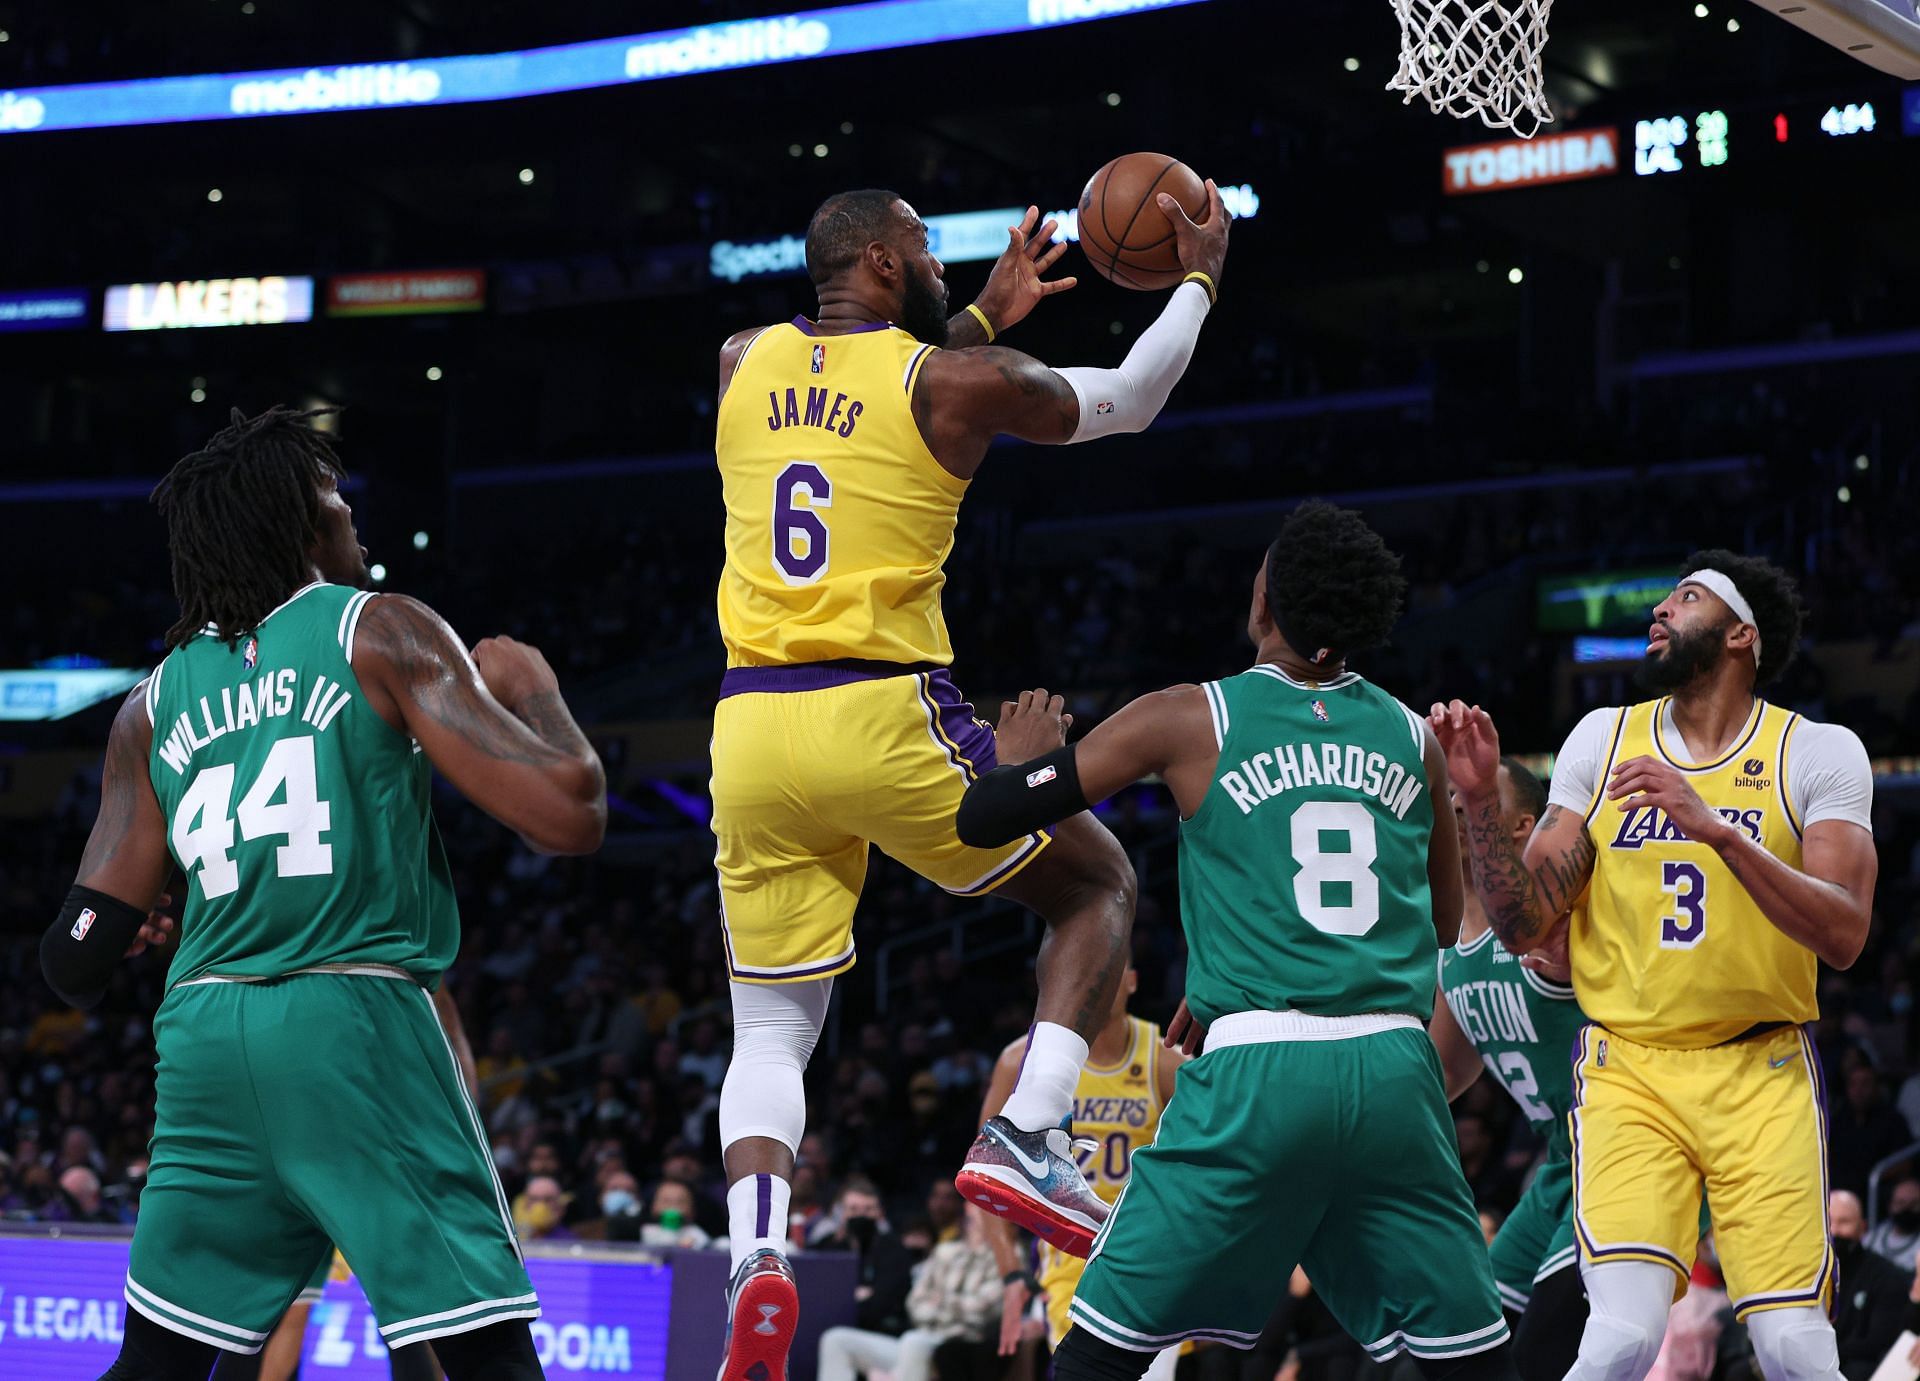 The LA Lakers imposed their will in the paint against the Boston Celtics in their last win.